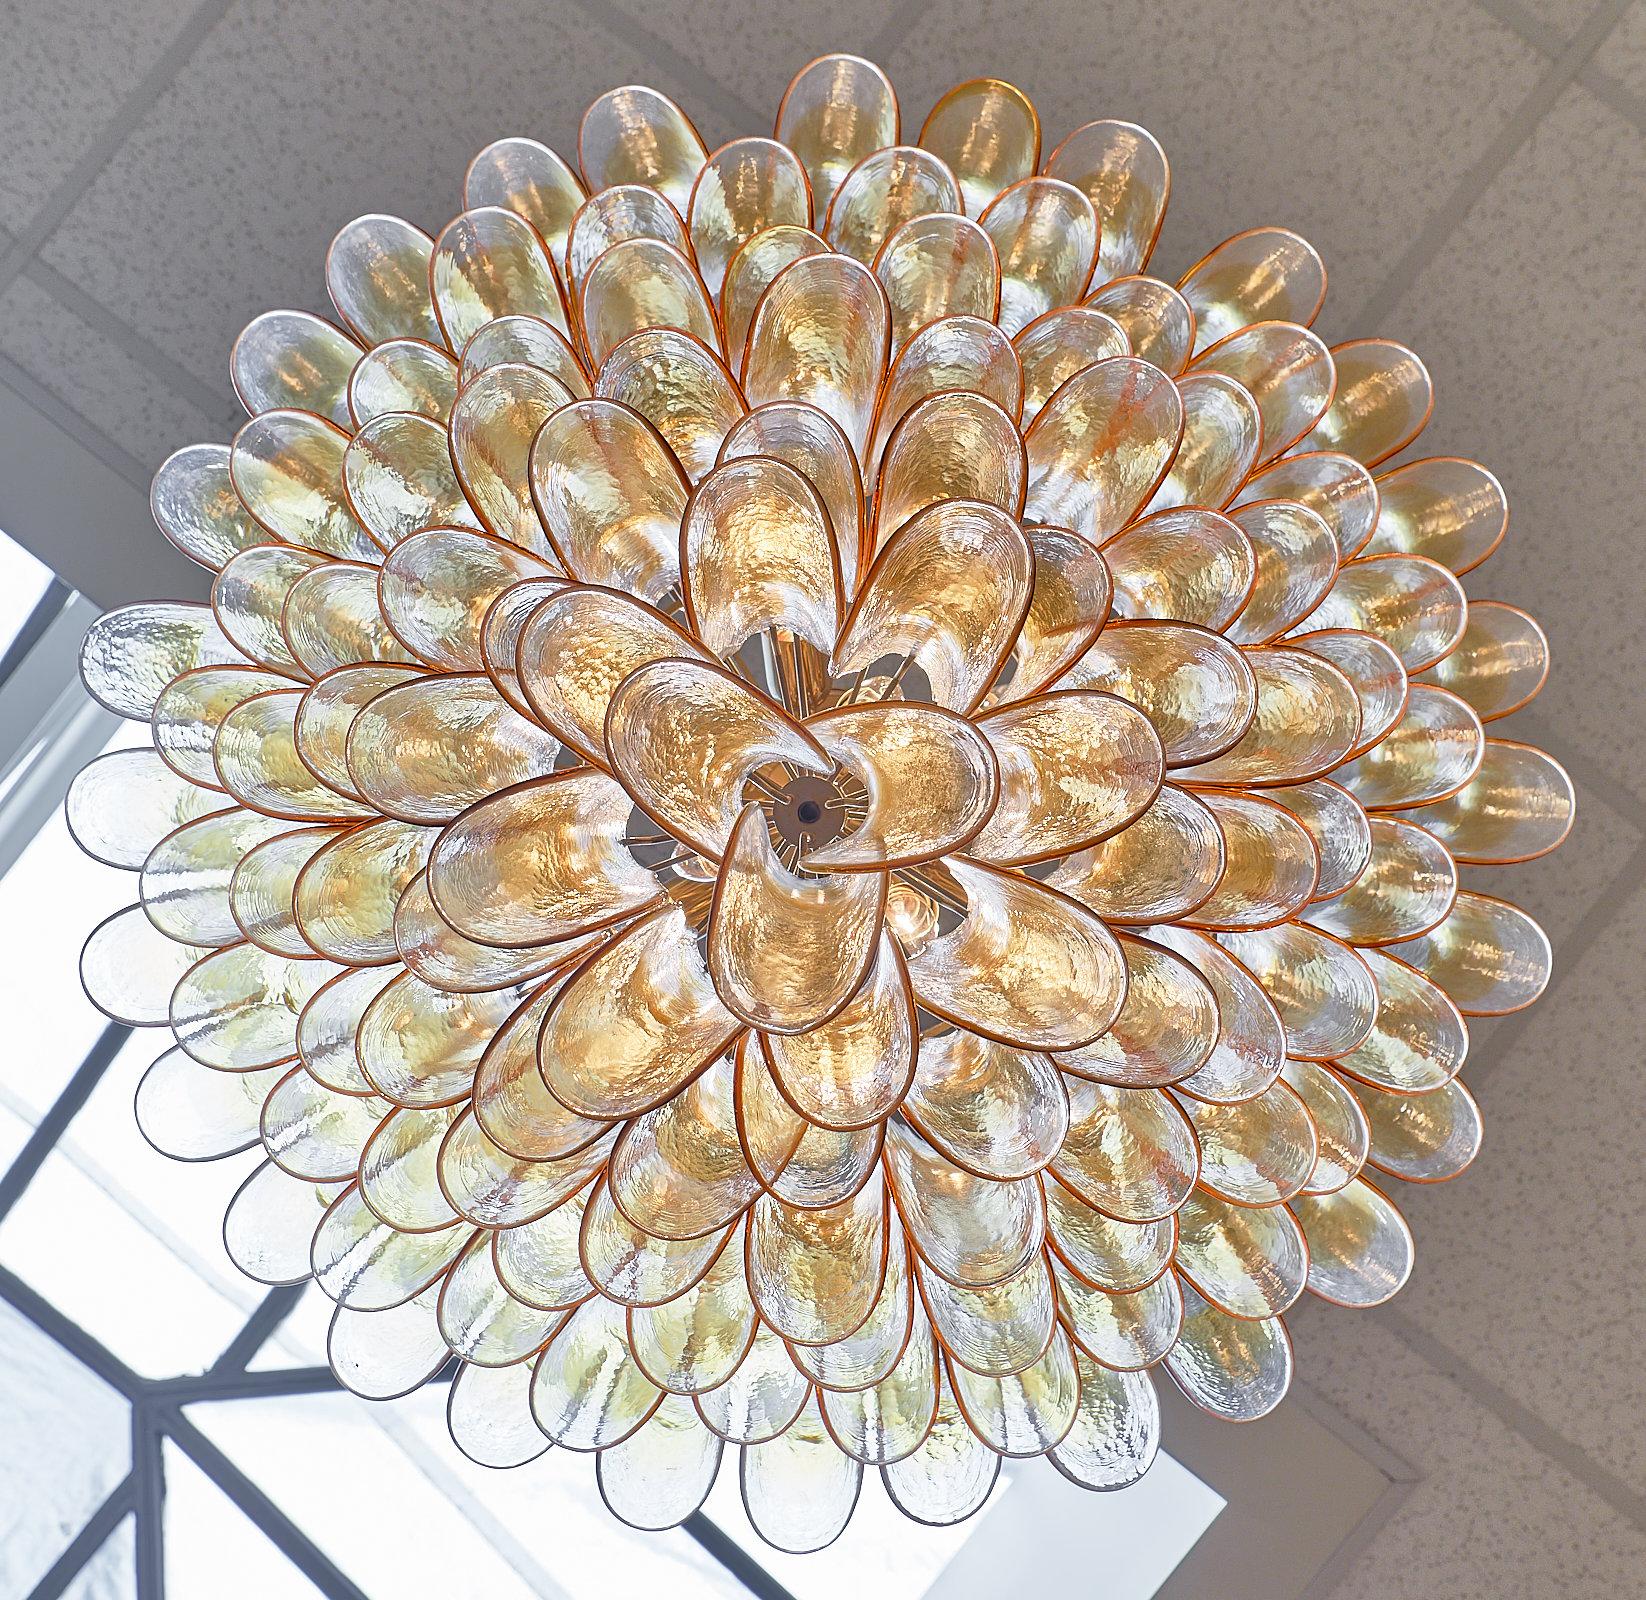 Orange and Clear Murano Glass “Selle” Chandelier For Sale 3